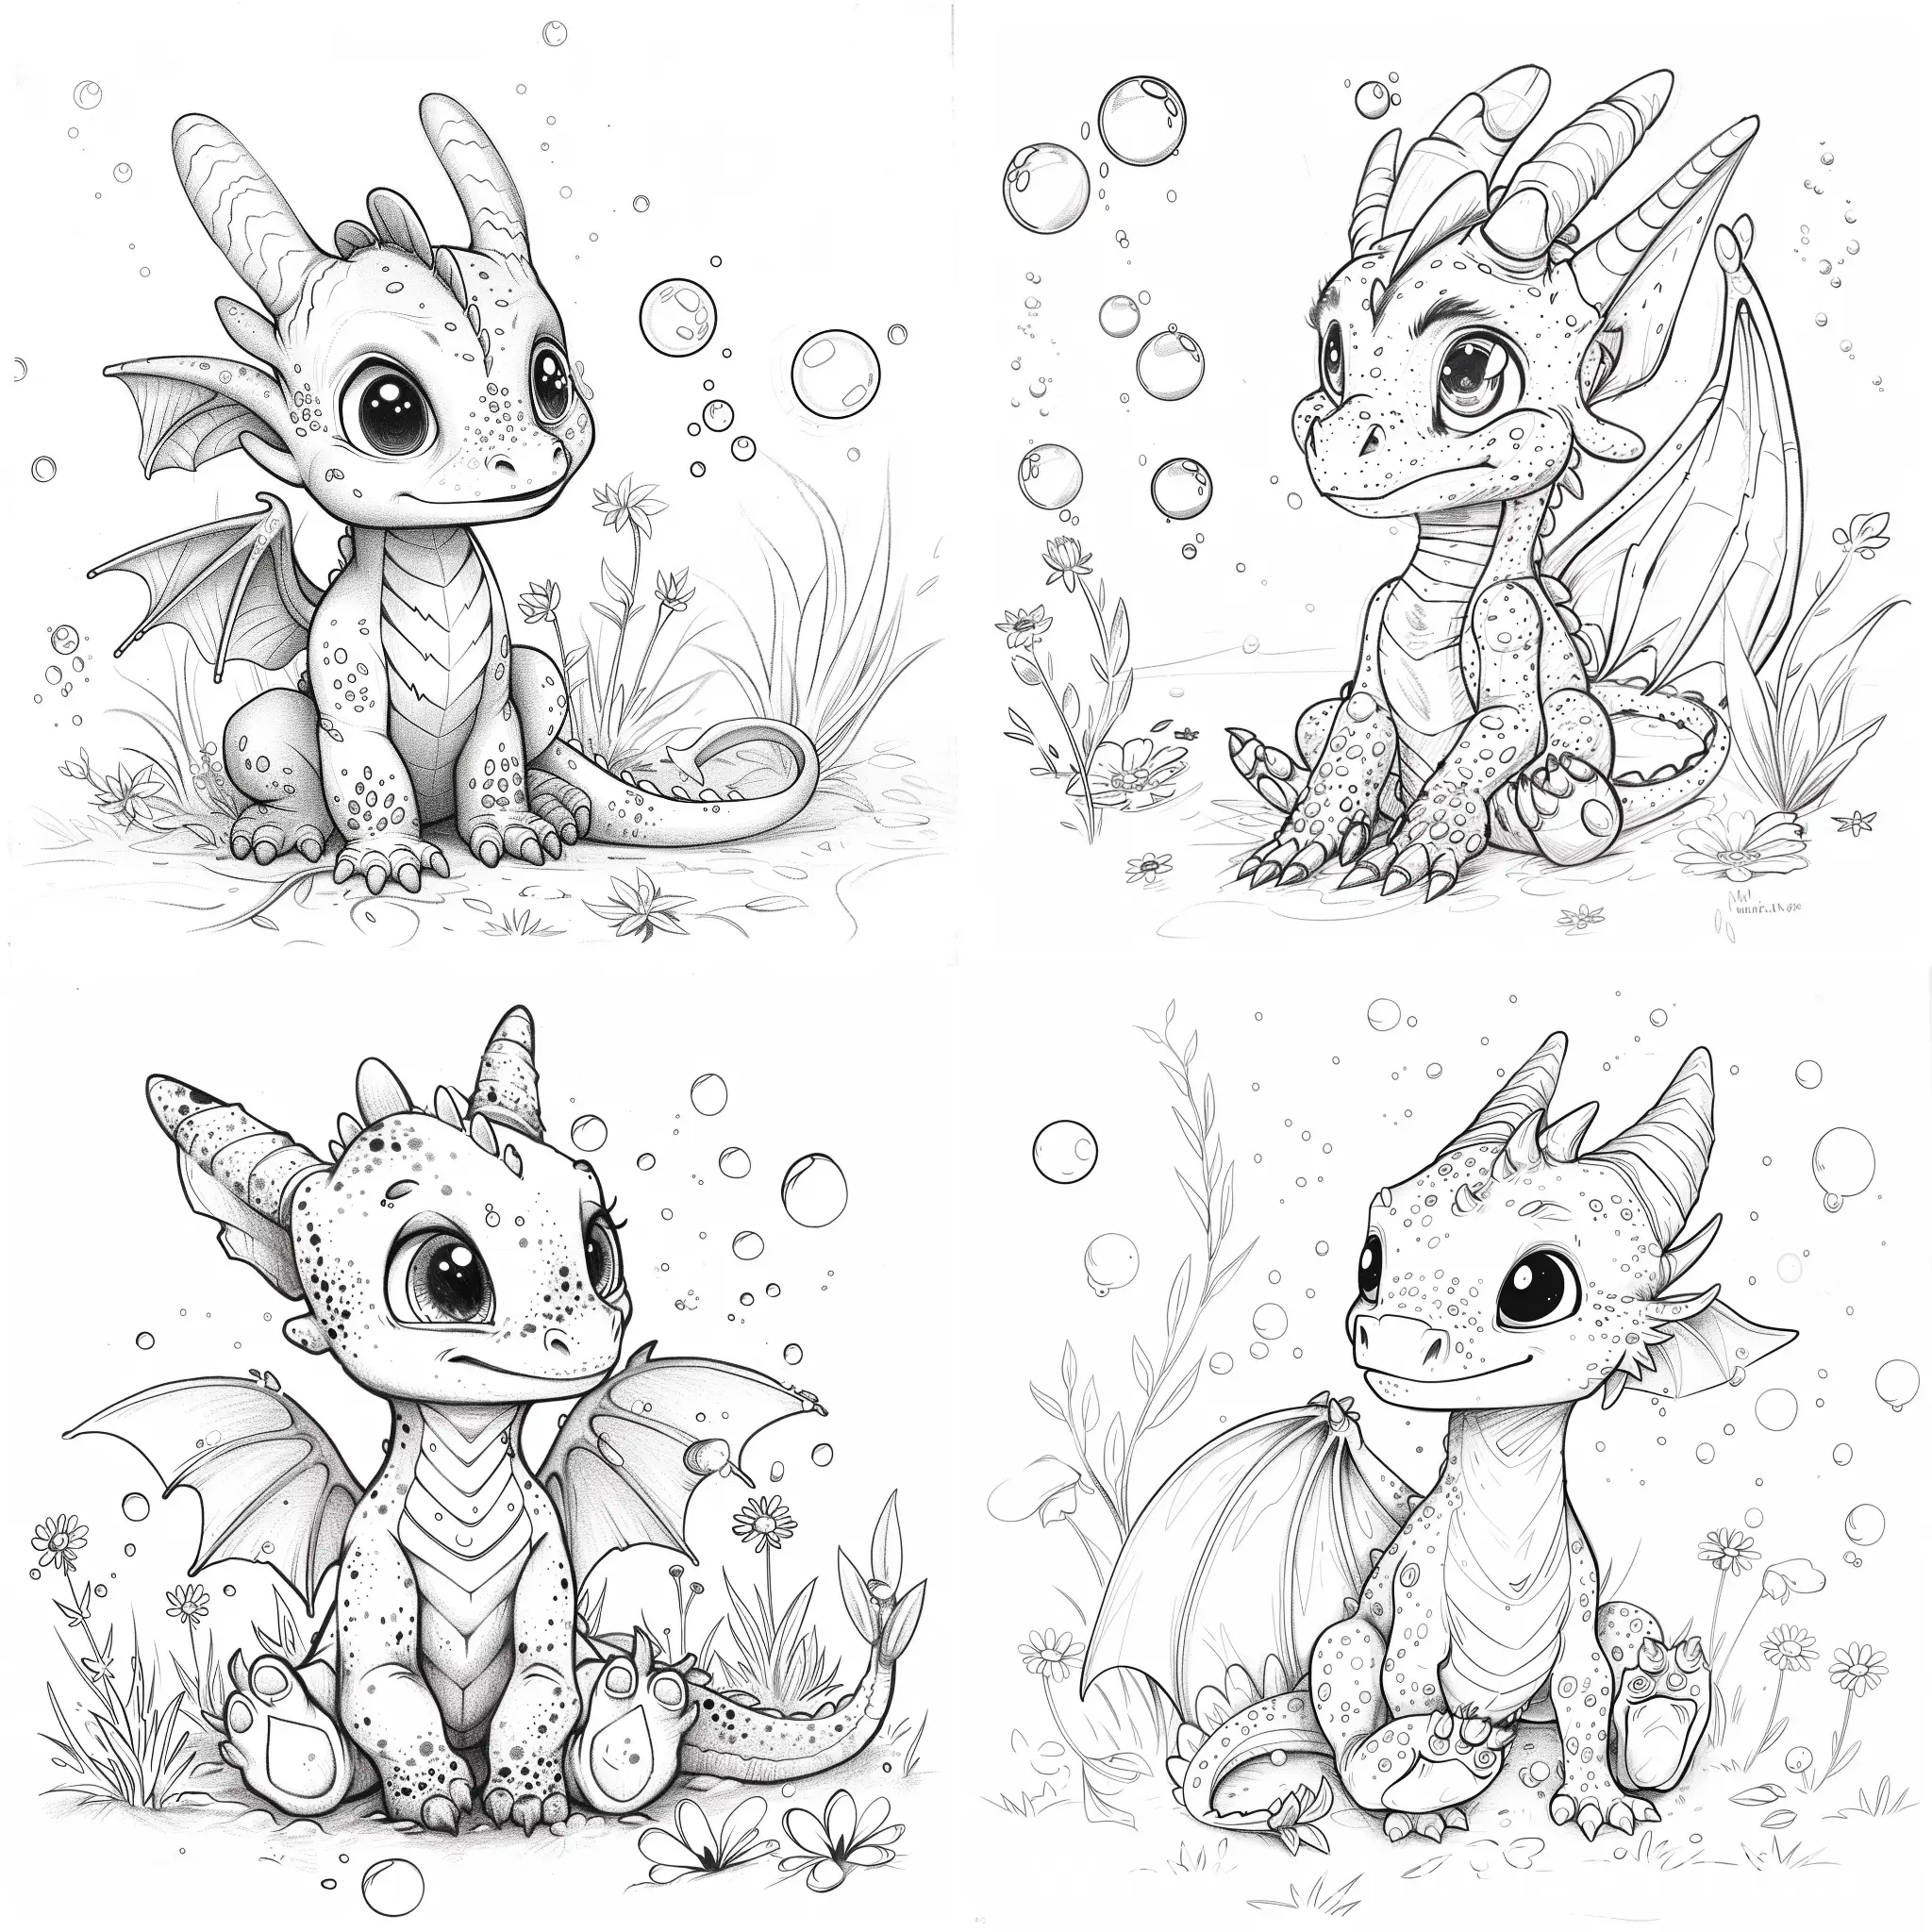 Adorable-Baby-Dragon-Surrounded-by-Floating-Bubbles